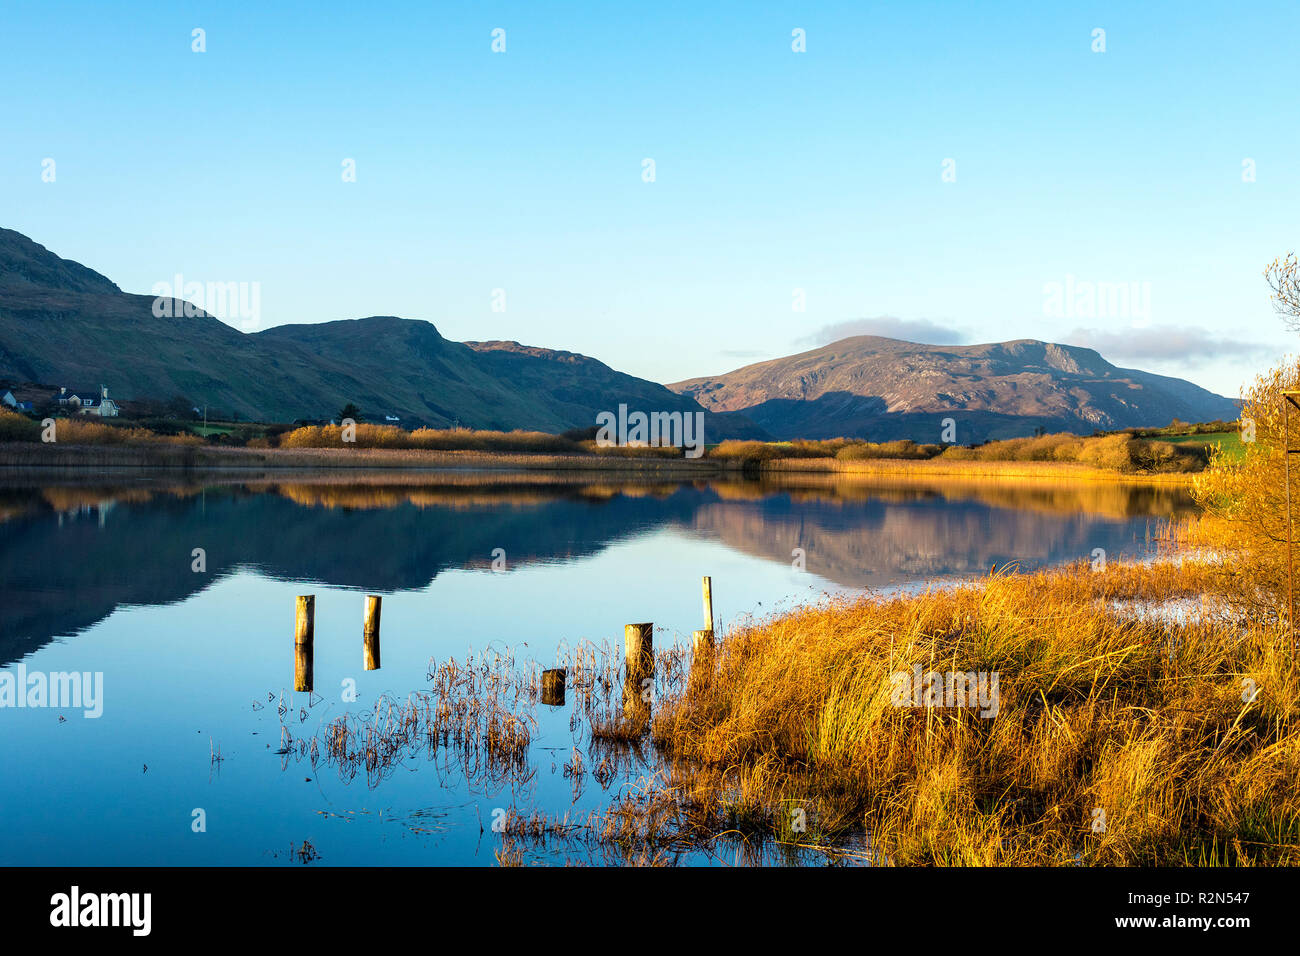 Lake Shanaghan, Ardara, County Donegal, Ireland. 20th November 2018. A still lake reflects hills around the village on a clear, crisp and cold morning. Credit: Richard Wayman/Alamy Live News Stock Photo